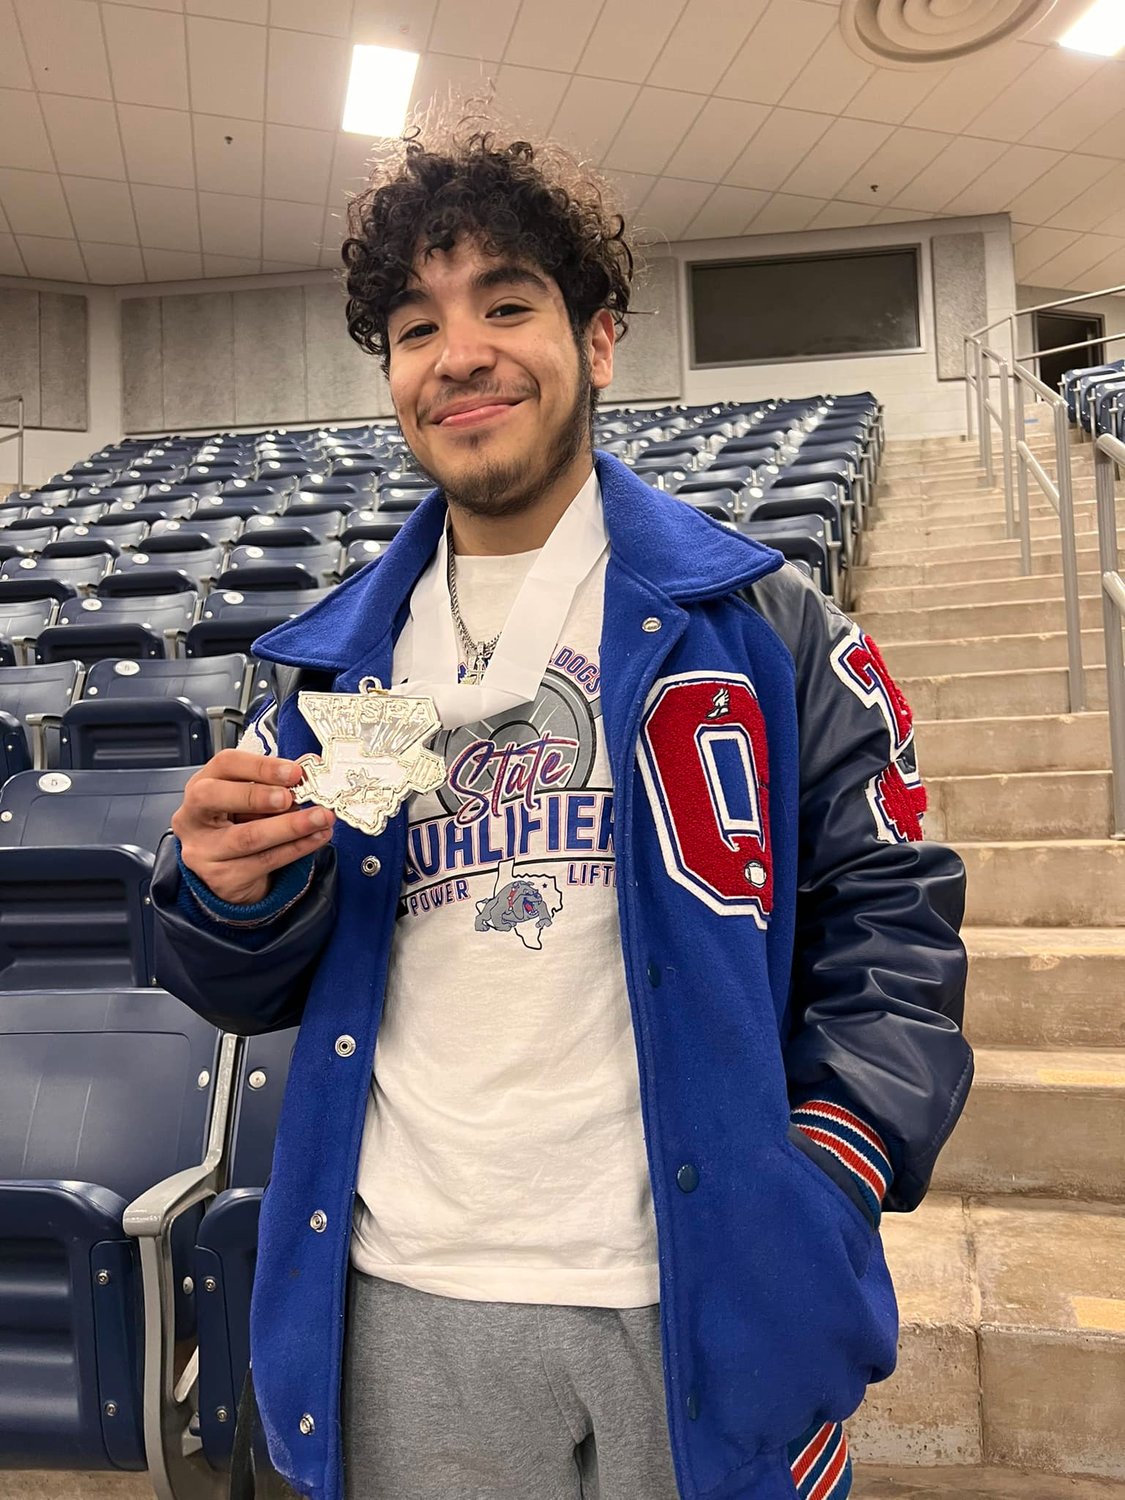 Carlos Flores of Quitman High School brought home the silver medal in his 114-pound weight class Friday at the state powerlifting meet in Abilene.